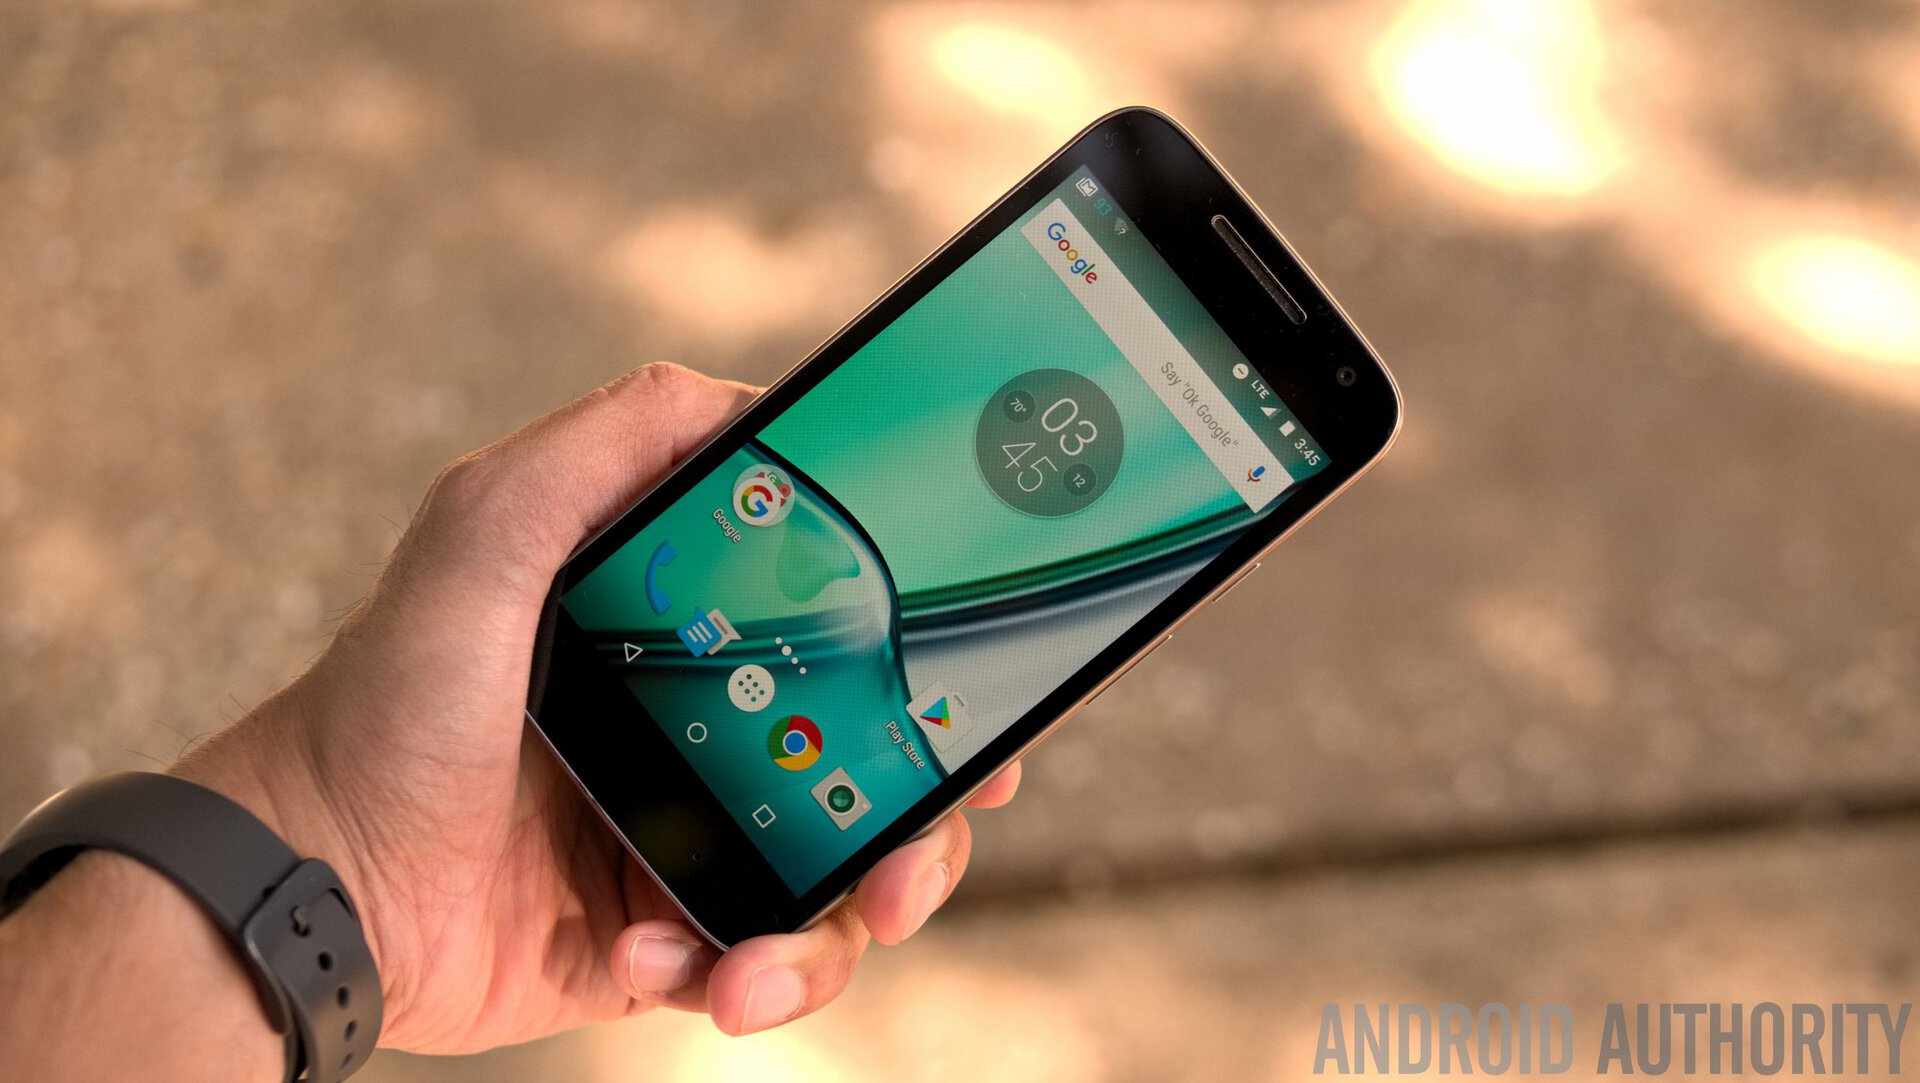 Moto G4 Play: Good, old and simple